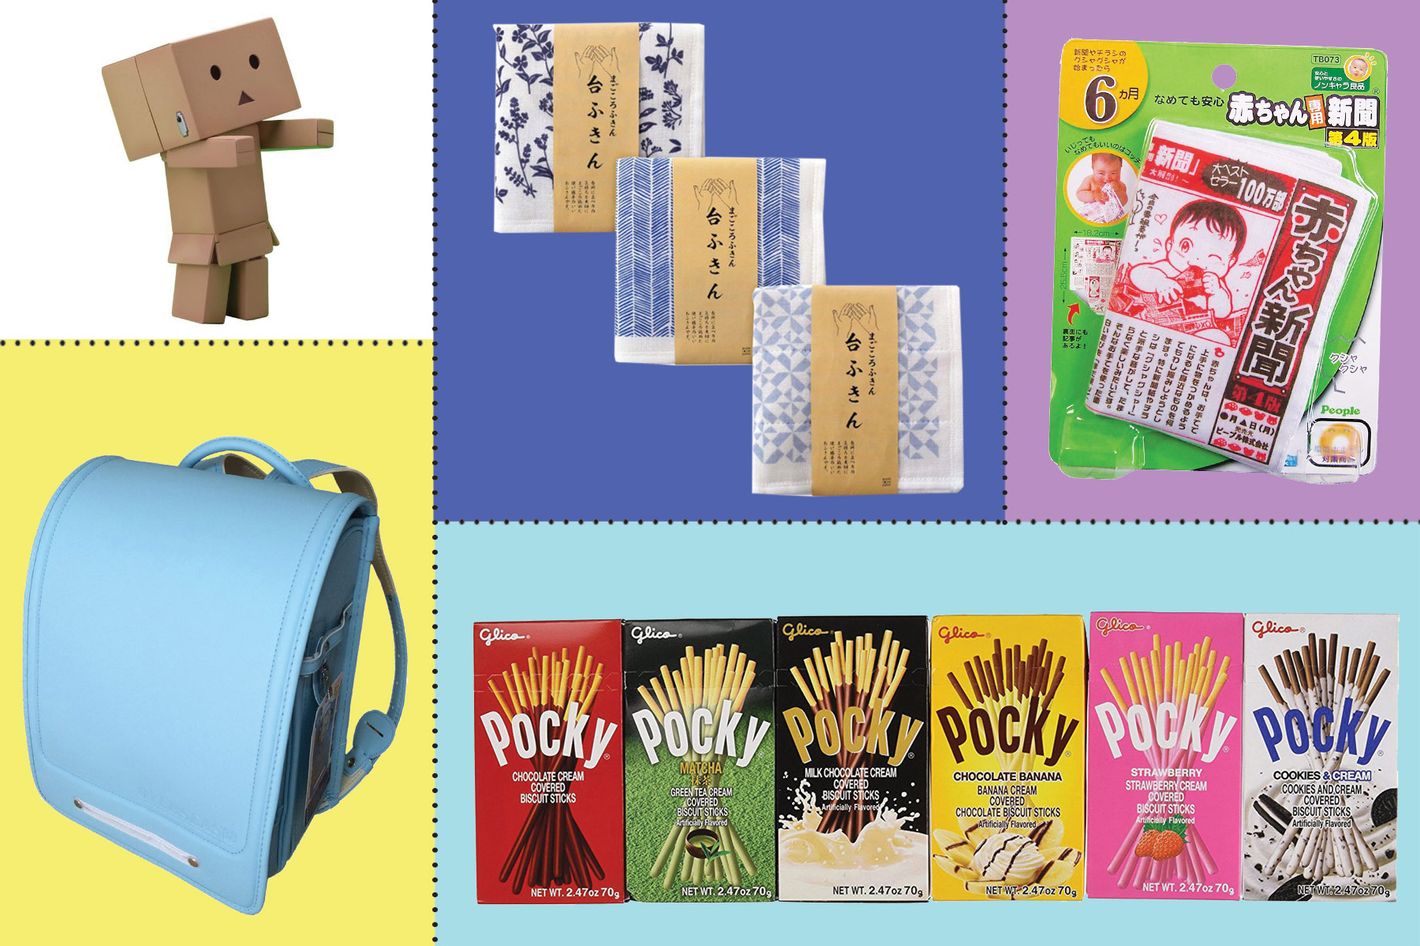 19 Seriously Geeky Japanese Products You Didn't Know You Needed